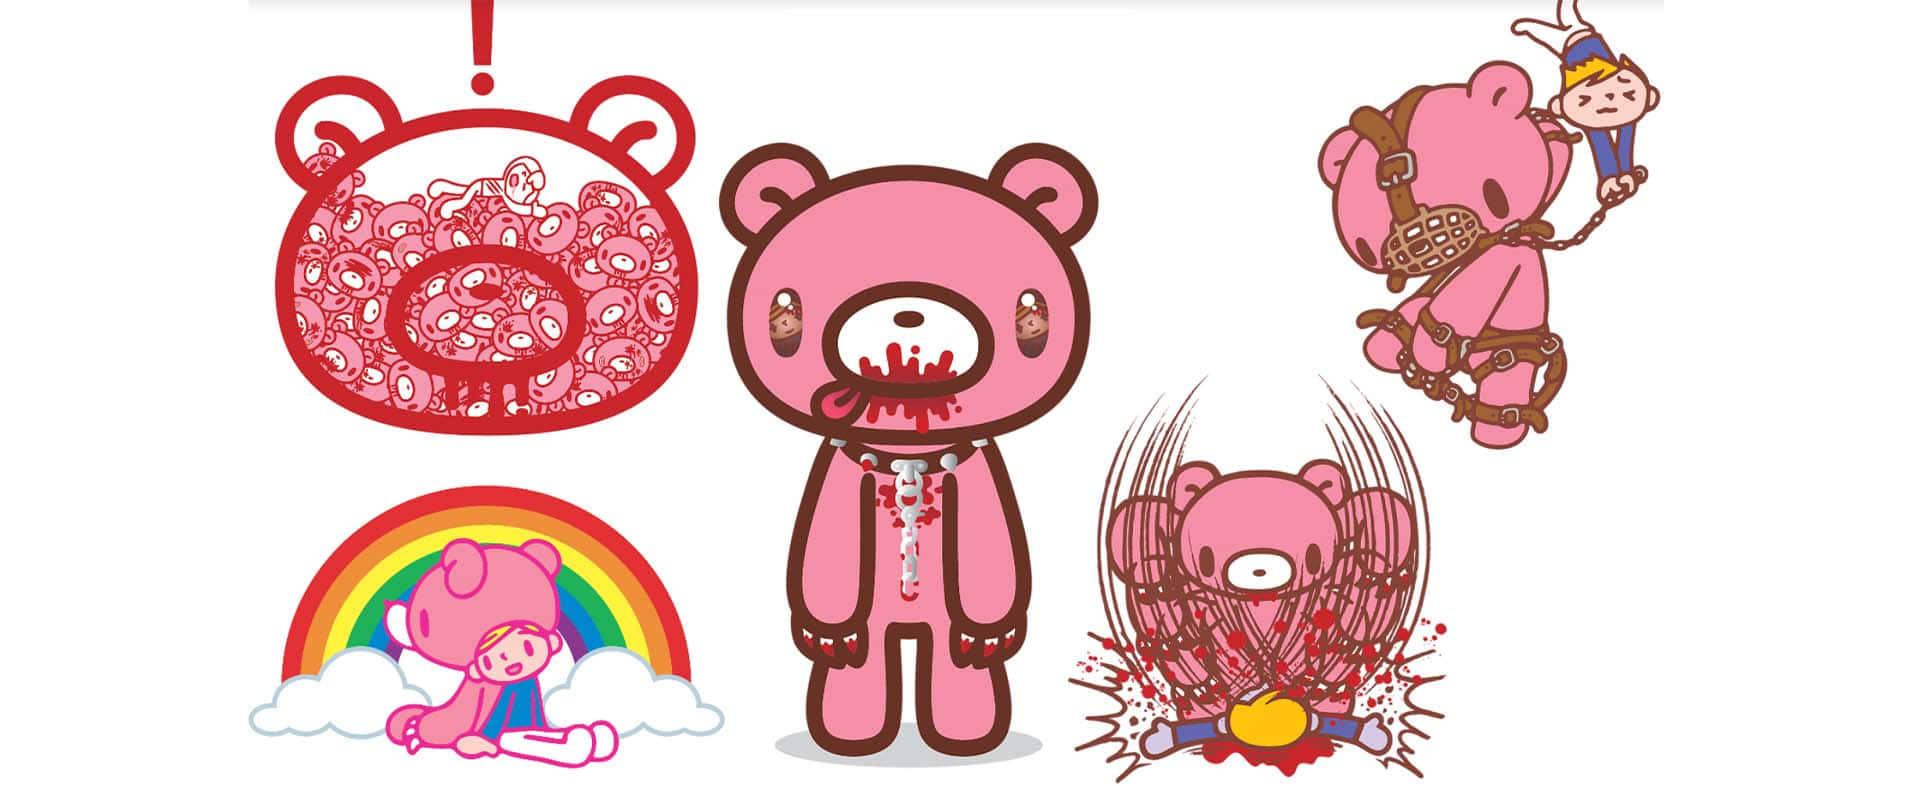 Gloomy Bear Doing Different Things Wallpaper